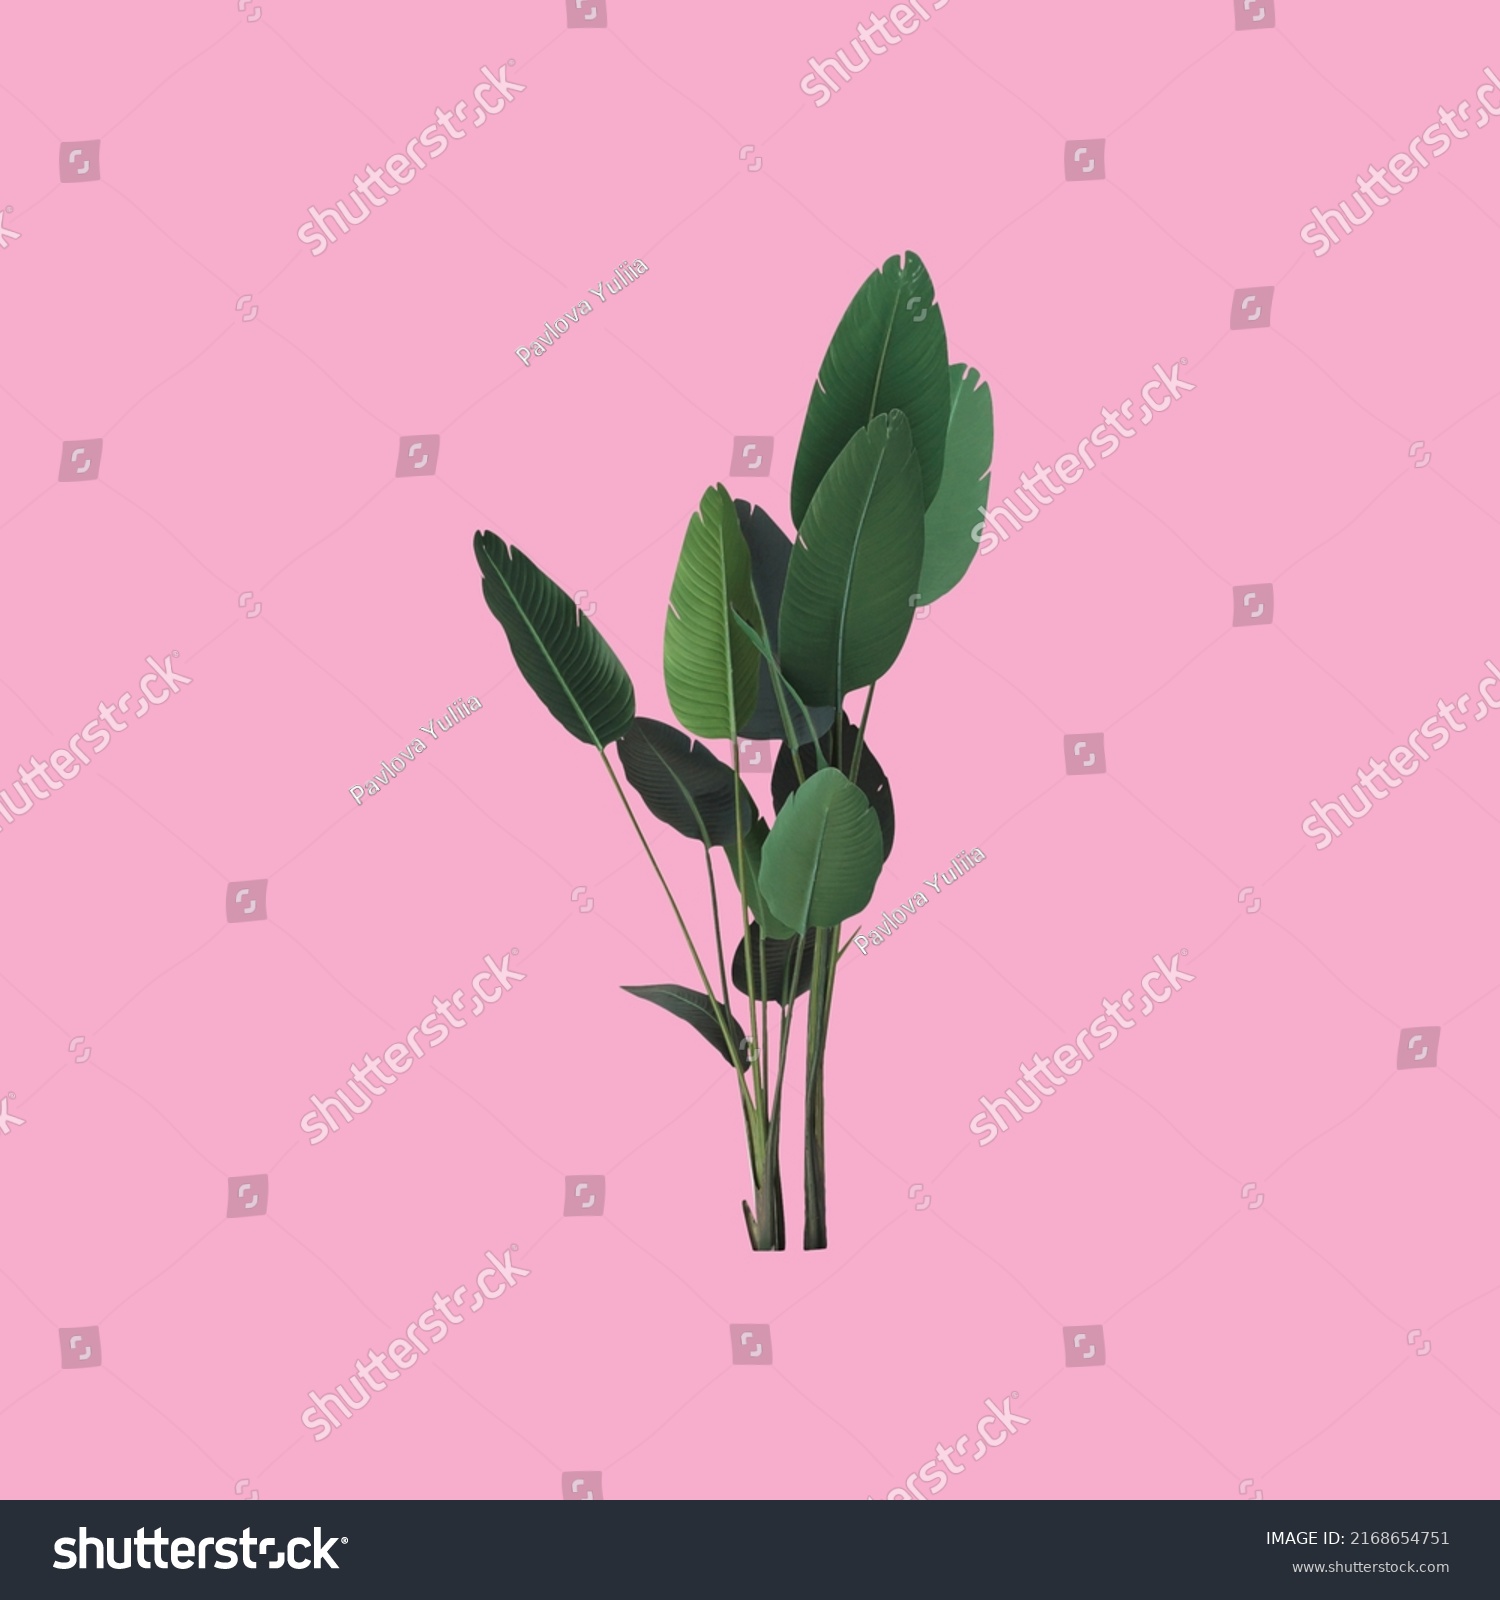 Green tropical plant on a pink background. Nature spring concept. minimalist background #2168654751